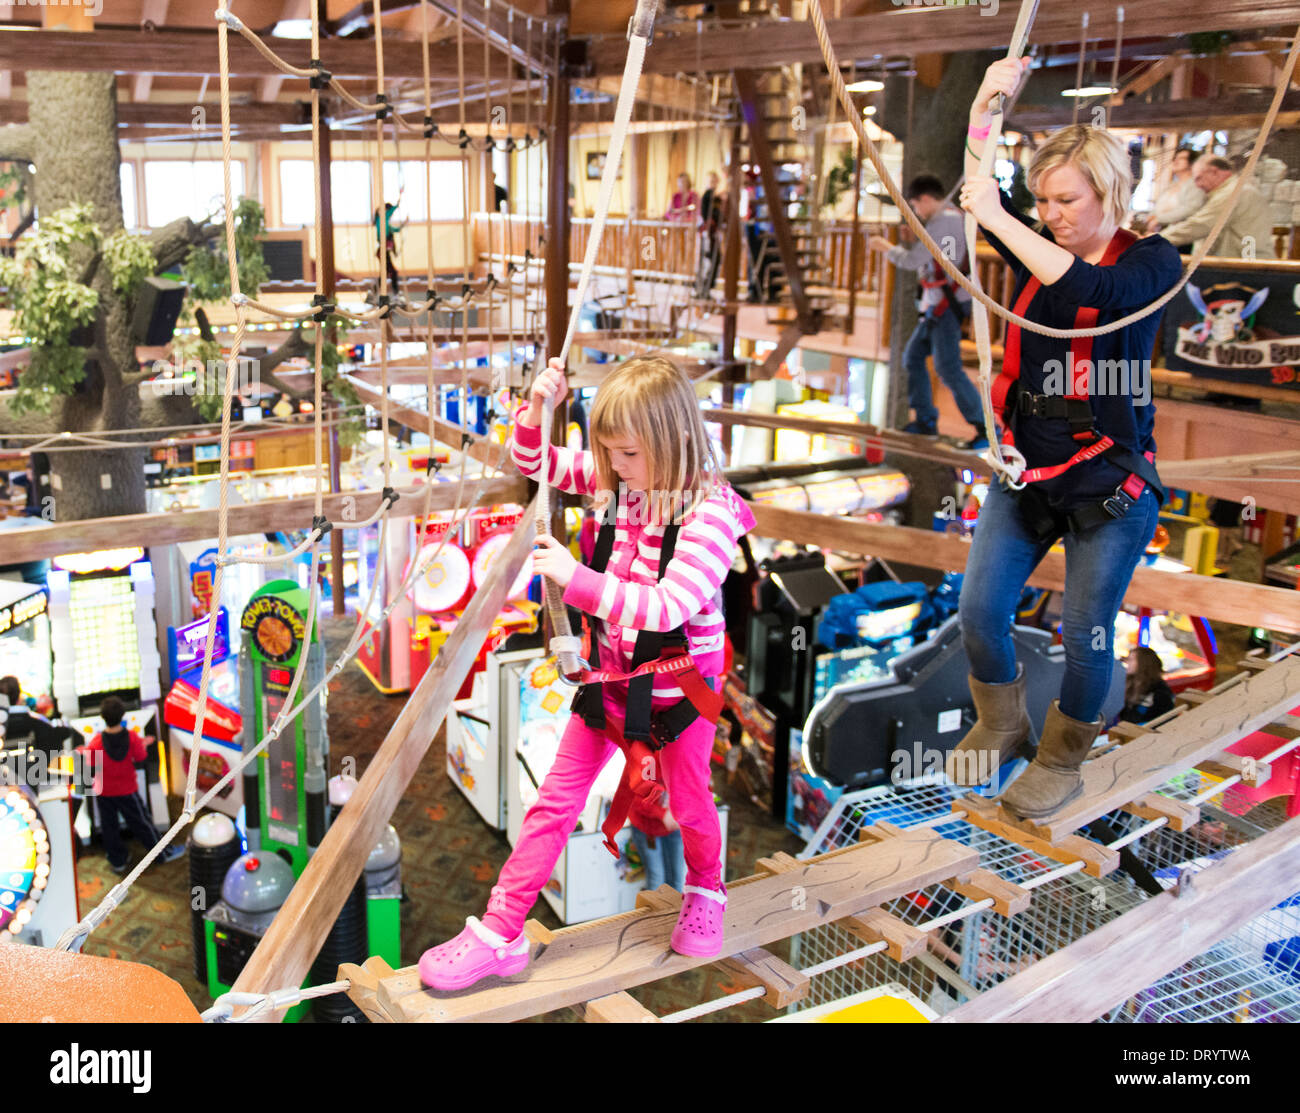 Indoor ropes course in the Wilderness Resort Stock Photo - Alamy